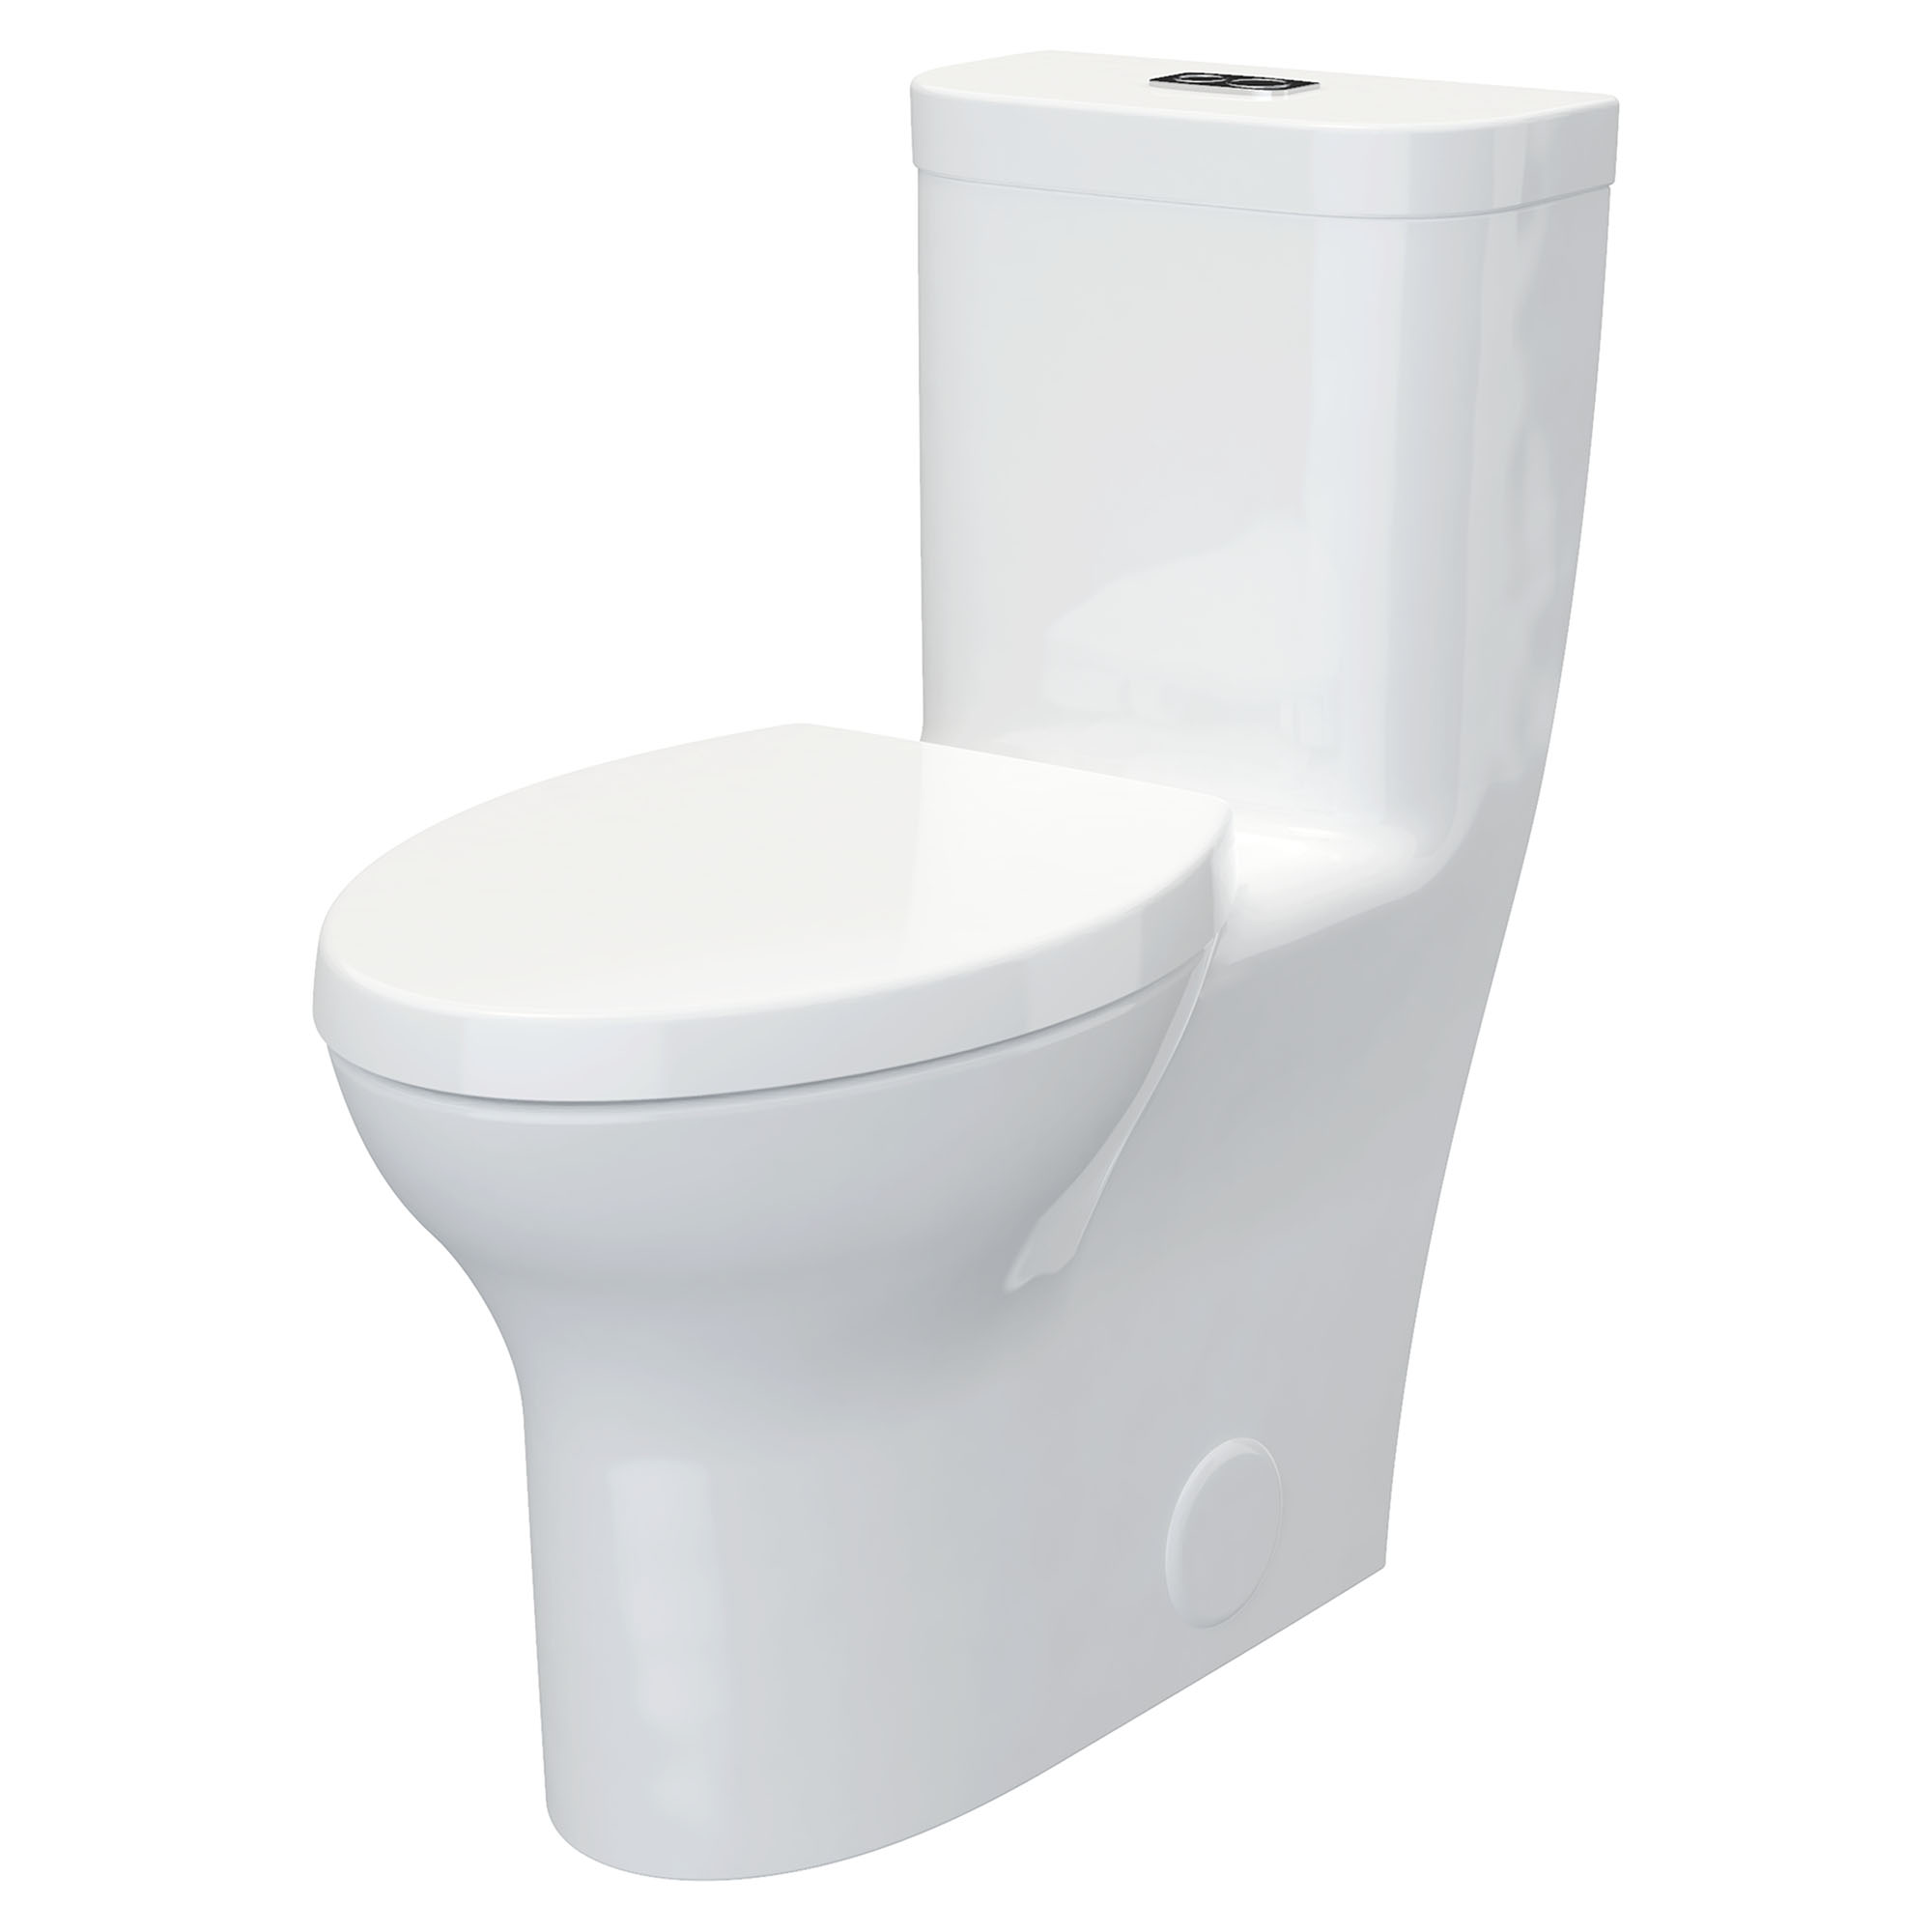 Equility® One-Piece Dual Flush Chair-Height Elongated Toilet with Seat